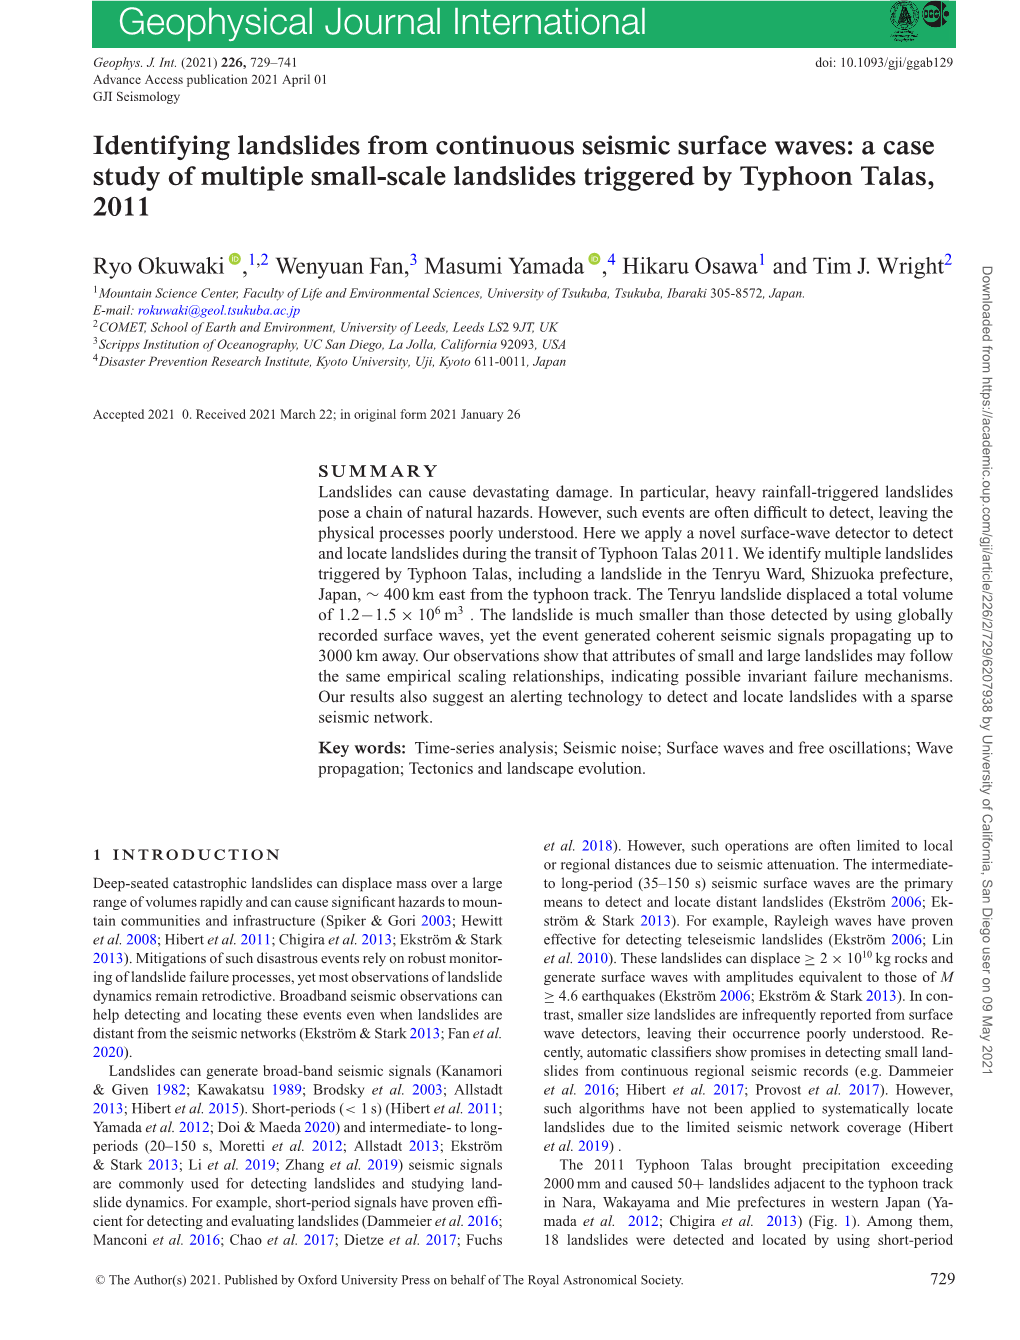 Identifying Landslides from Continuous Seismic Surface Waves: a Case Study of Multiple Small-Scale Landslides Triggered by Typhoon Talas, 2011